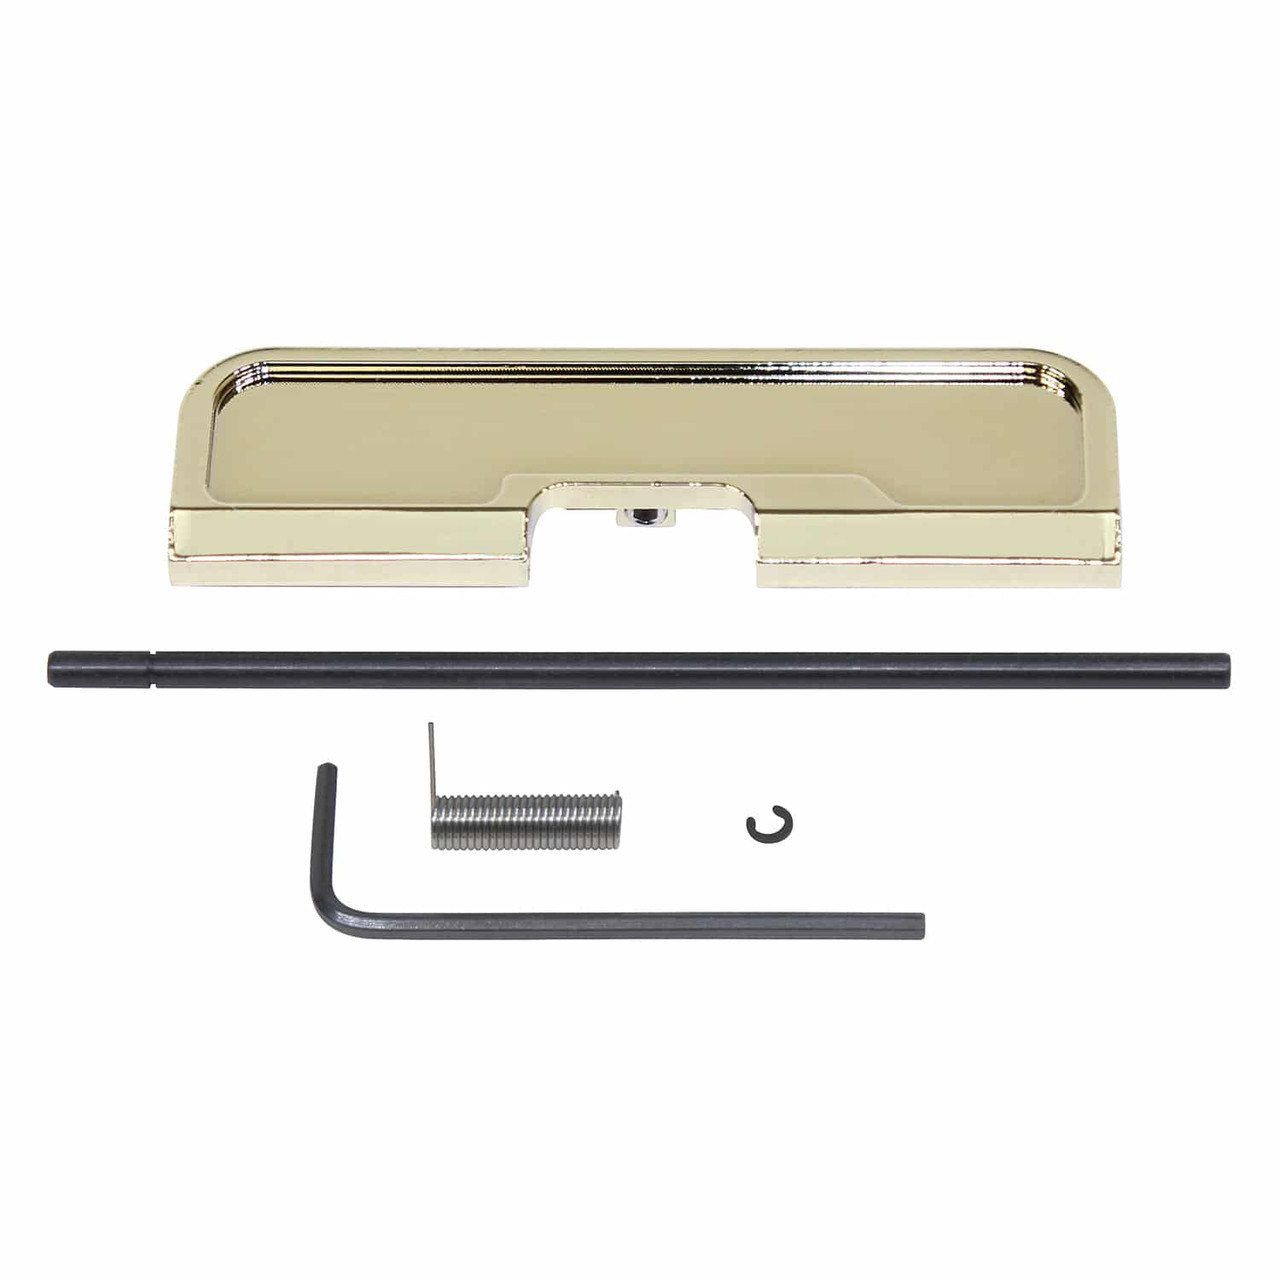 Guntec USA 223GATE-G3-GP Ejection Port Dust Cover Assembly (Gen 3) (Gold Plated)